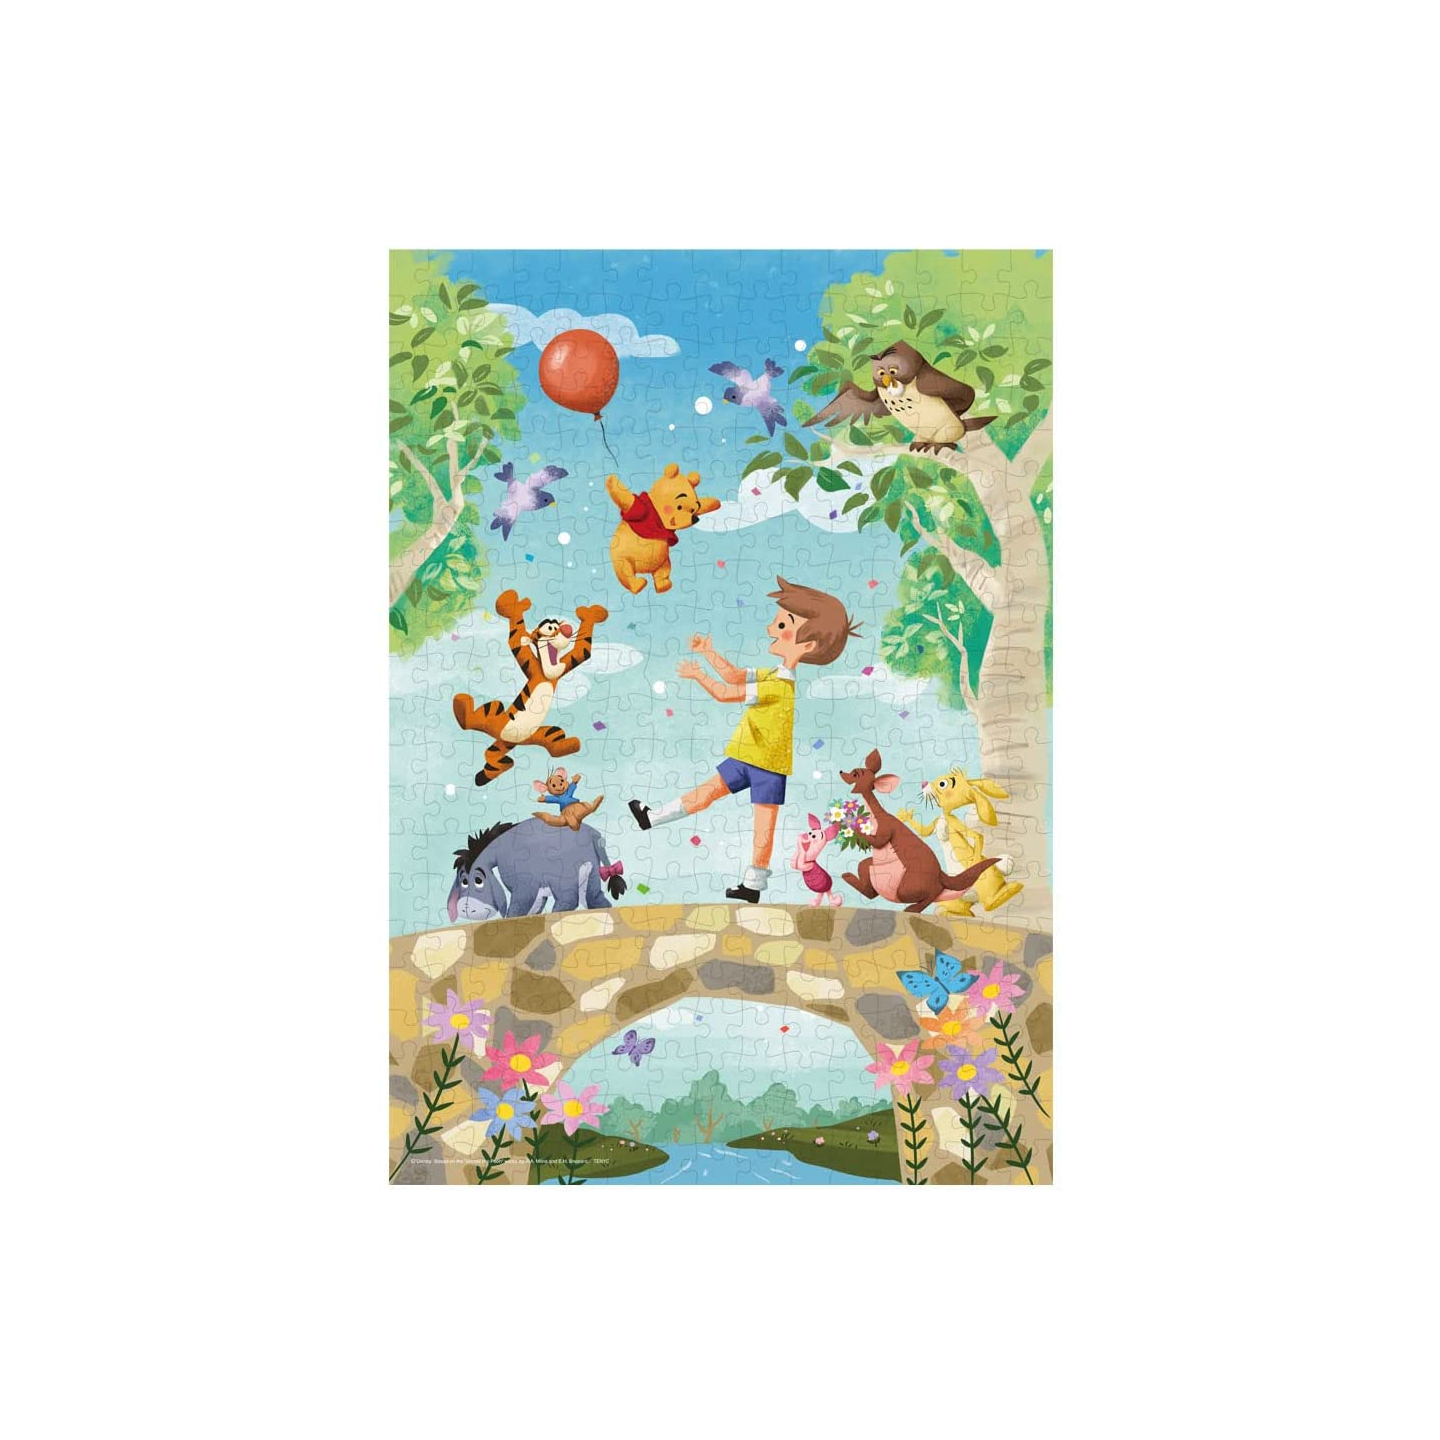 tenyo-jigsaw-puzzle-d-1000-030-winnie-the-pooh-ii-special-art-collection-1000pcs